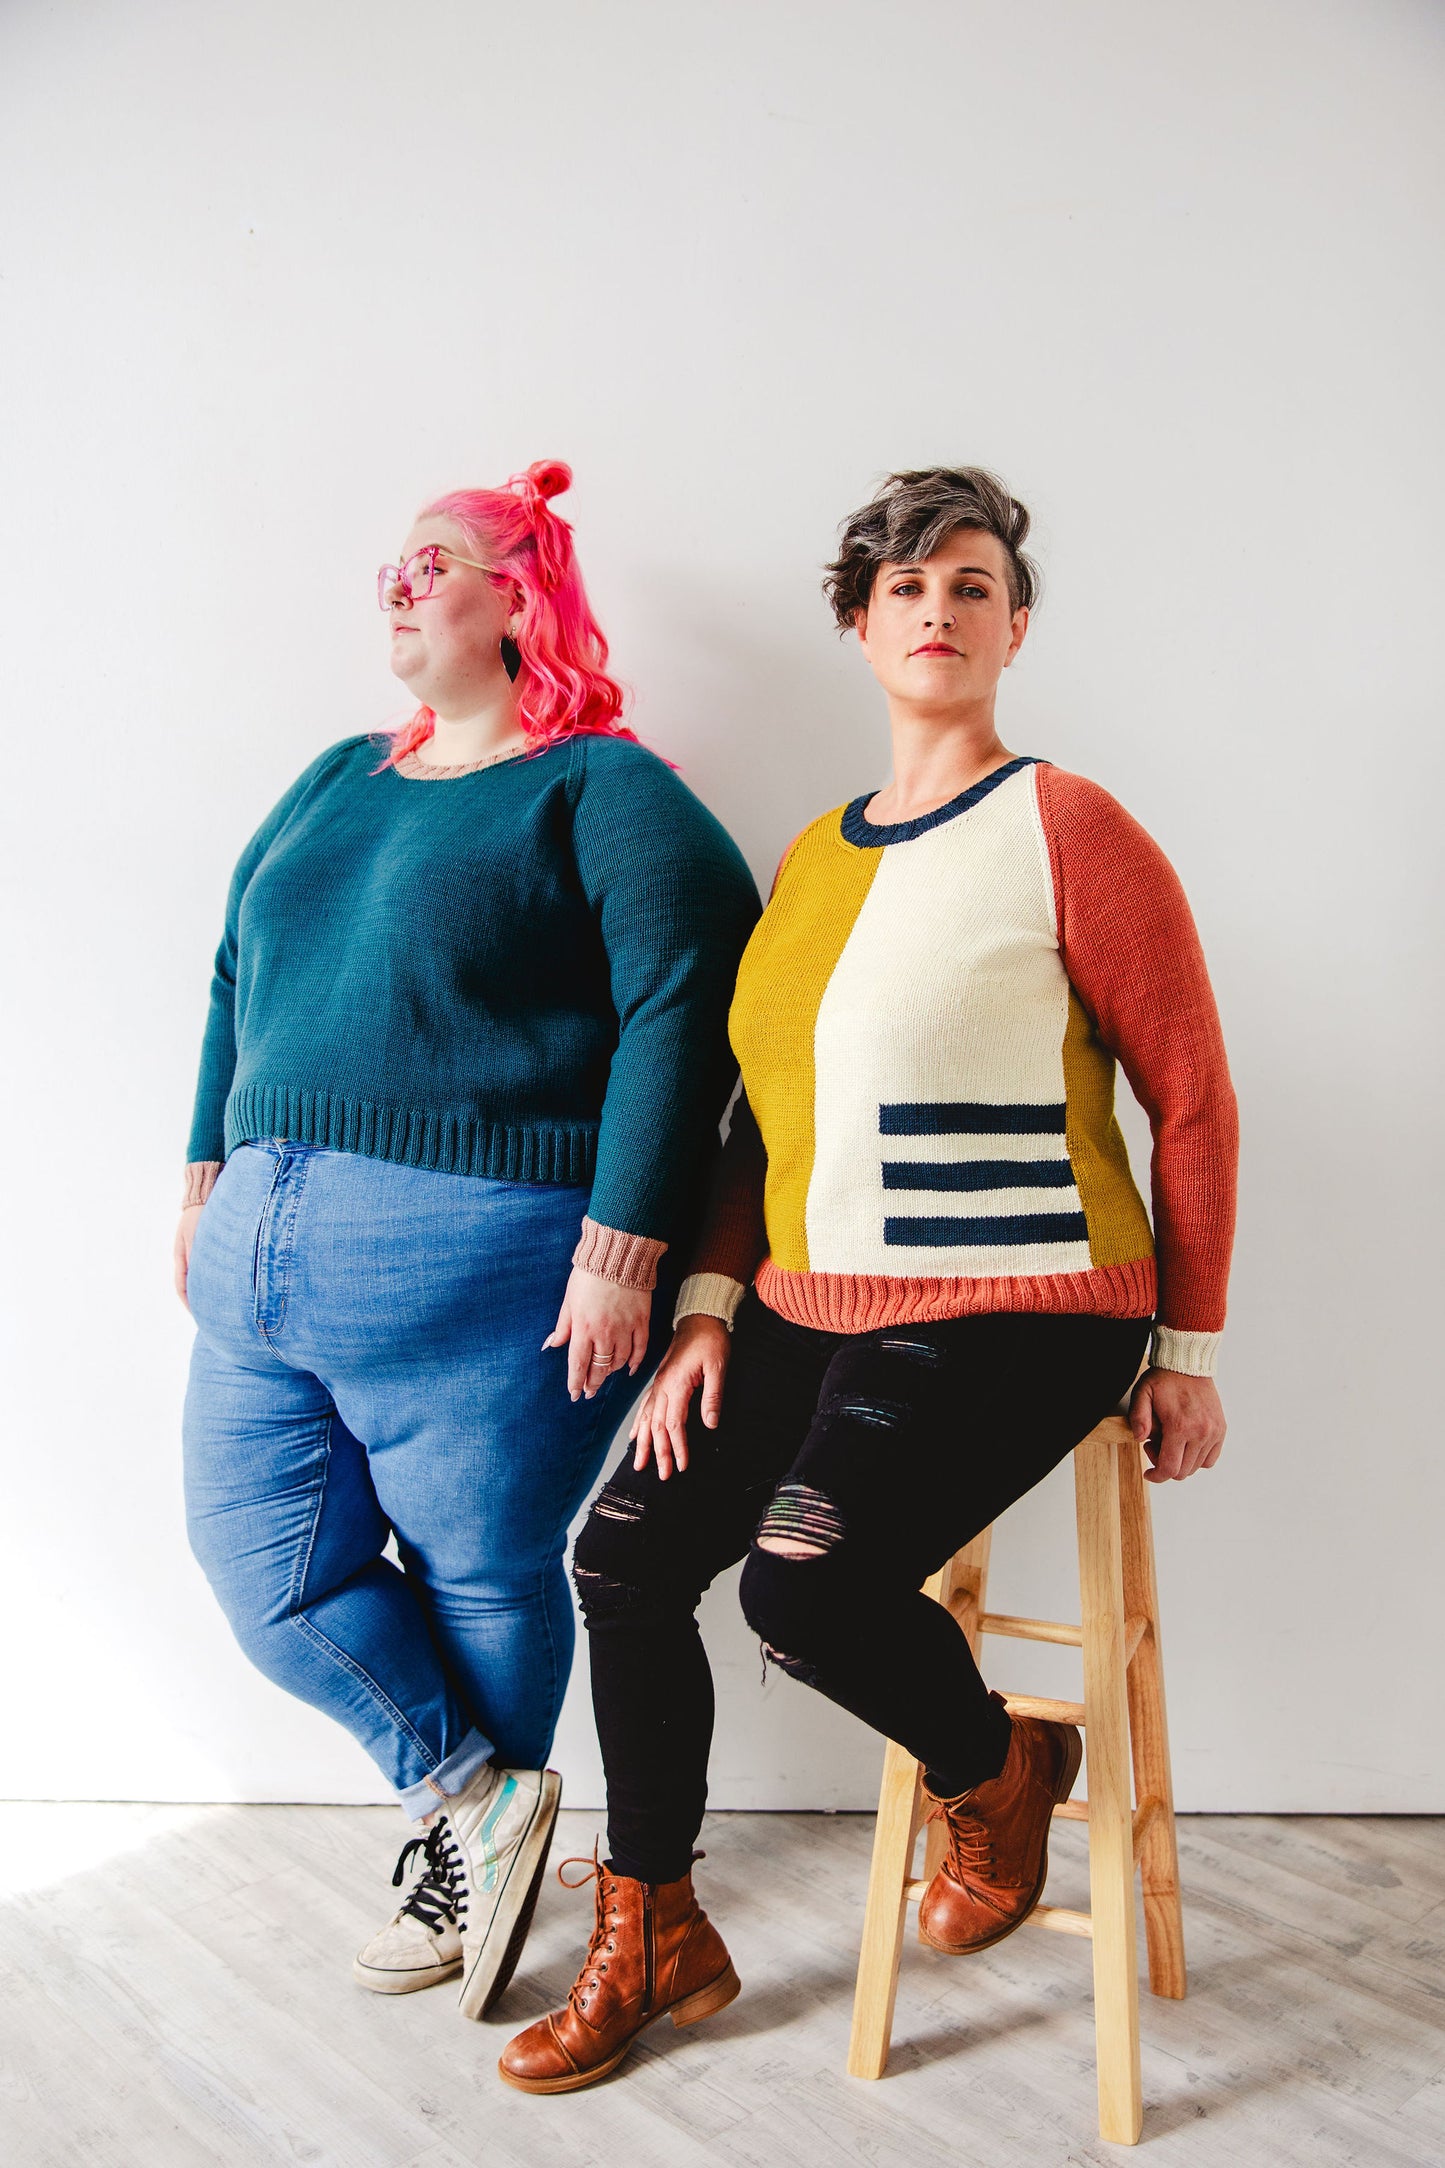 Courtney, who wears a solid green version of the Study Group pullover with contrasting pink cuffs, stands next to Jen and looks off camera. Jen is seated on a stool next to Courtney, wearing a yellow, white, red, and blue version of the Study Group pullover, knit with intarsia techniques.